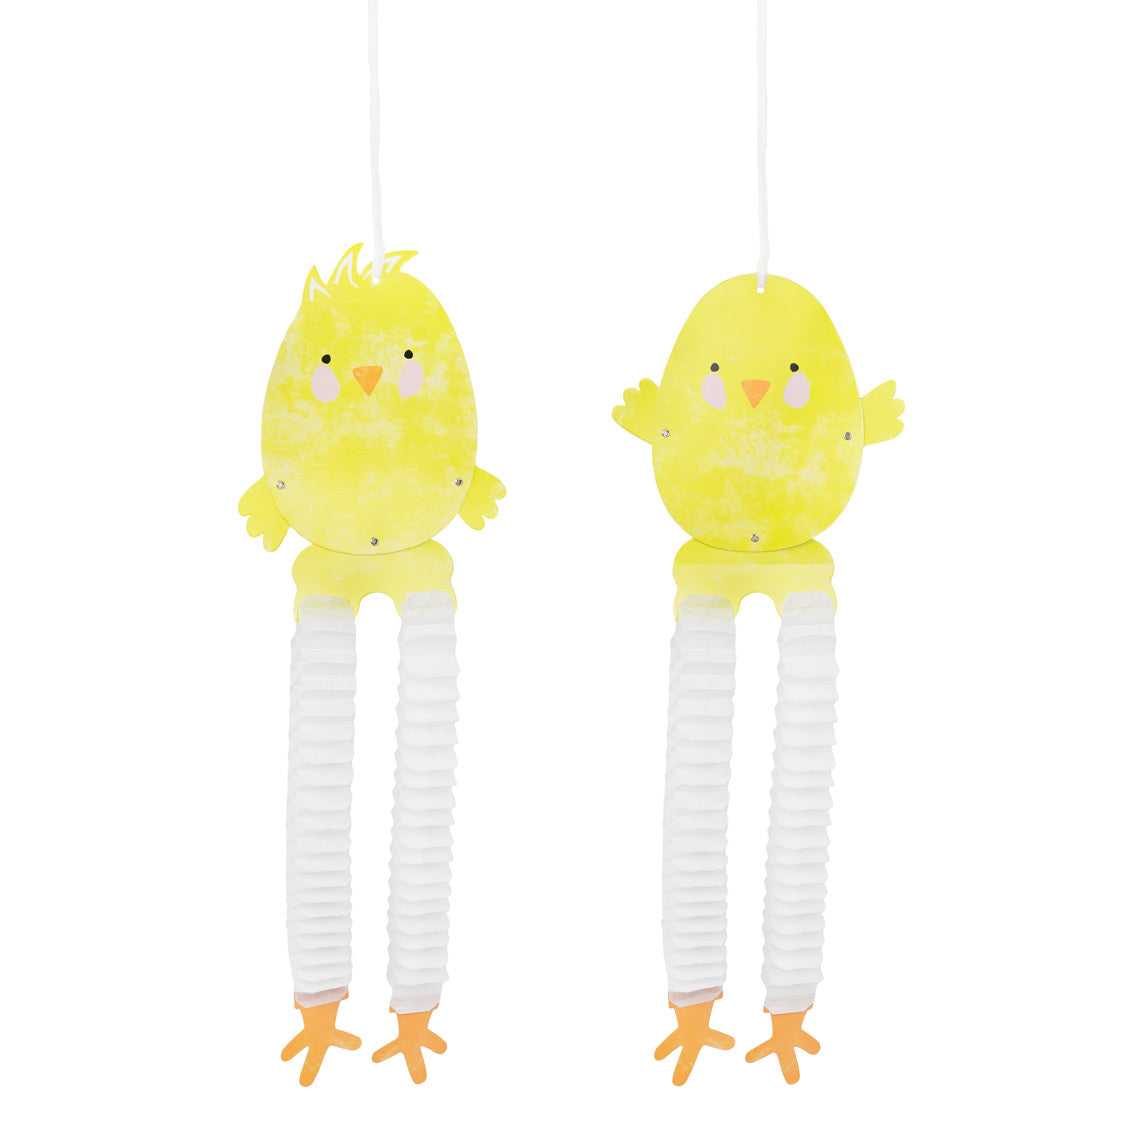 Chick Paper Honeycomb Easter Decorations 2 Pk from penny black